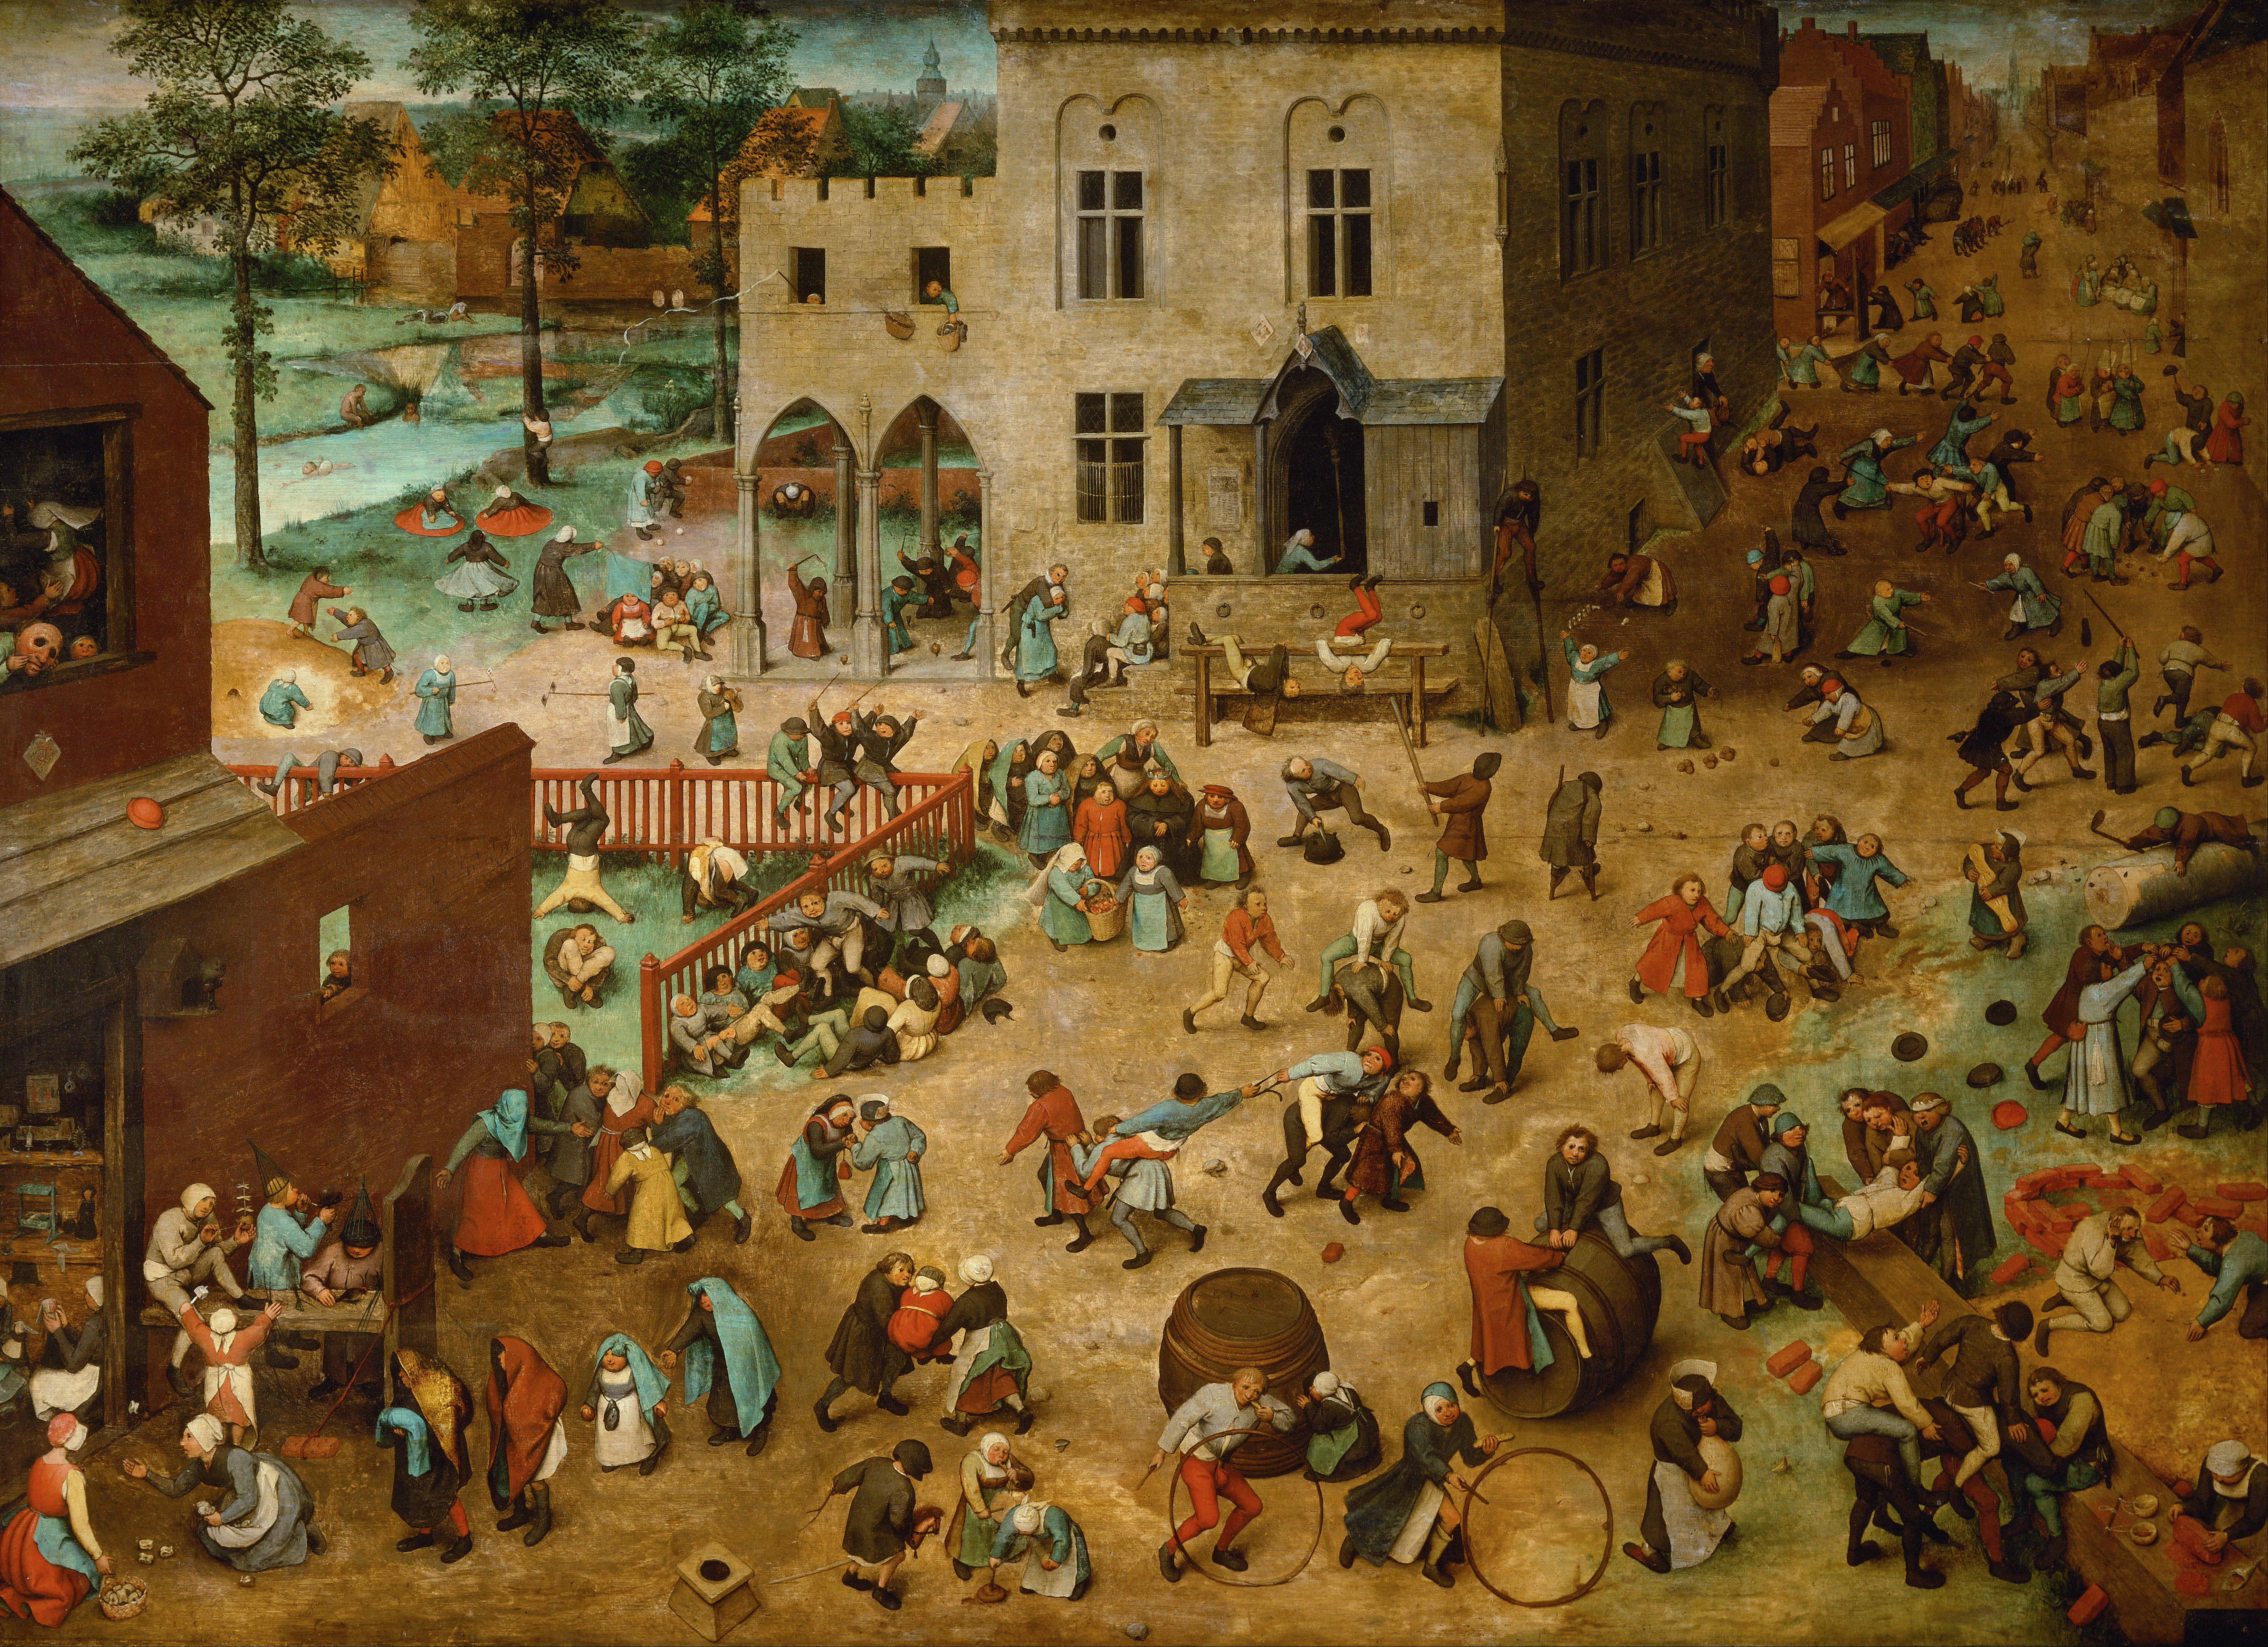 Historical oil painting by Pieter Brueghel the Elder in the public domain named Children's Games that shows a chaotic scene where many people are running around on a public street